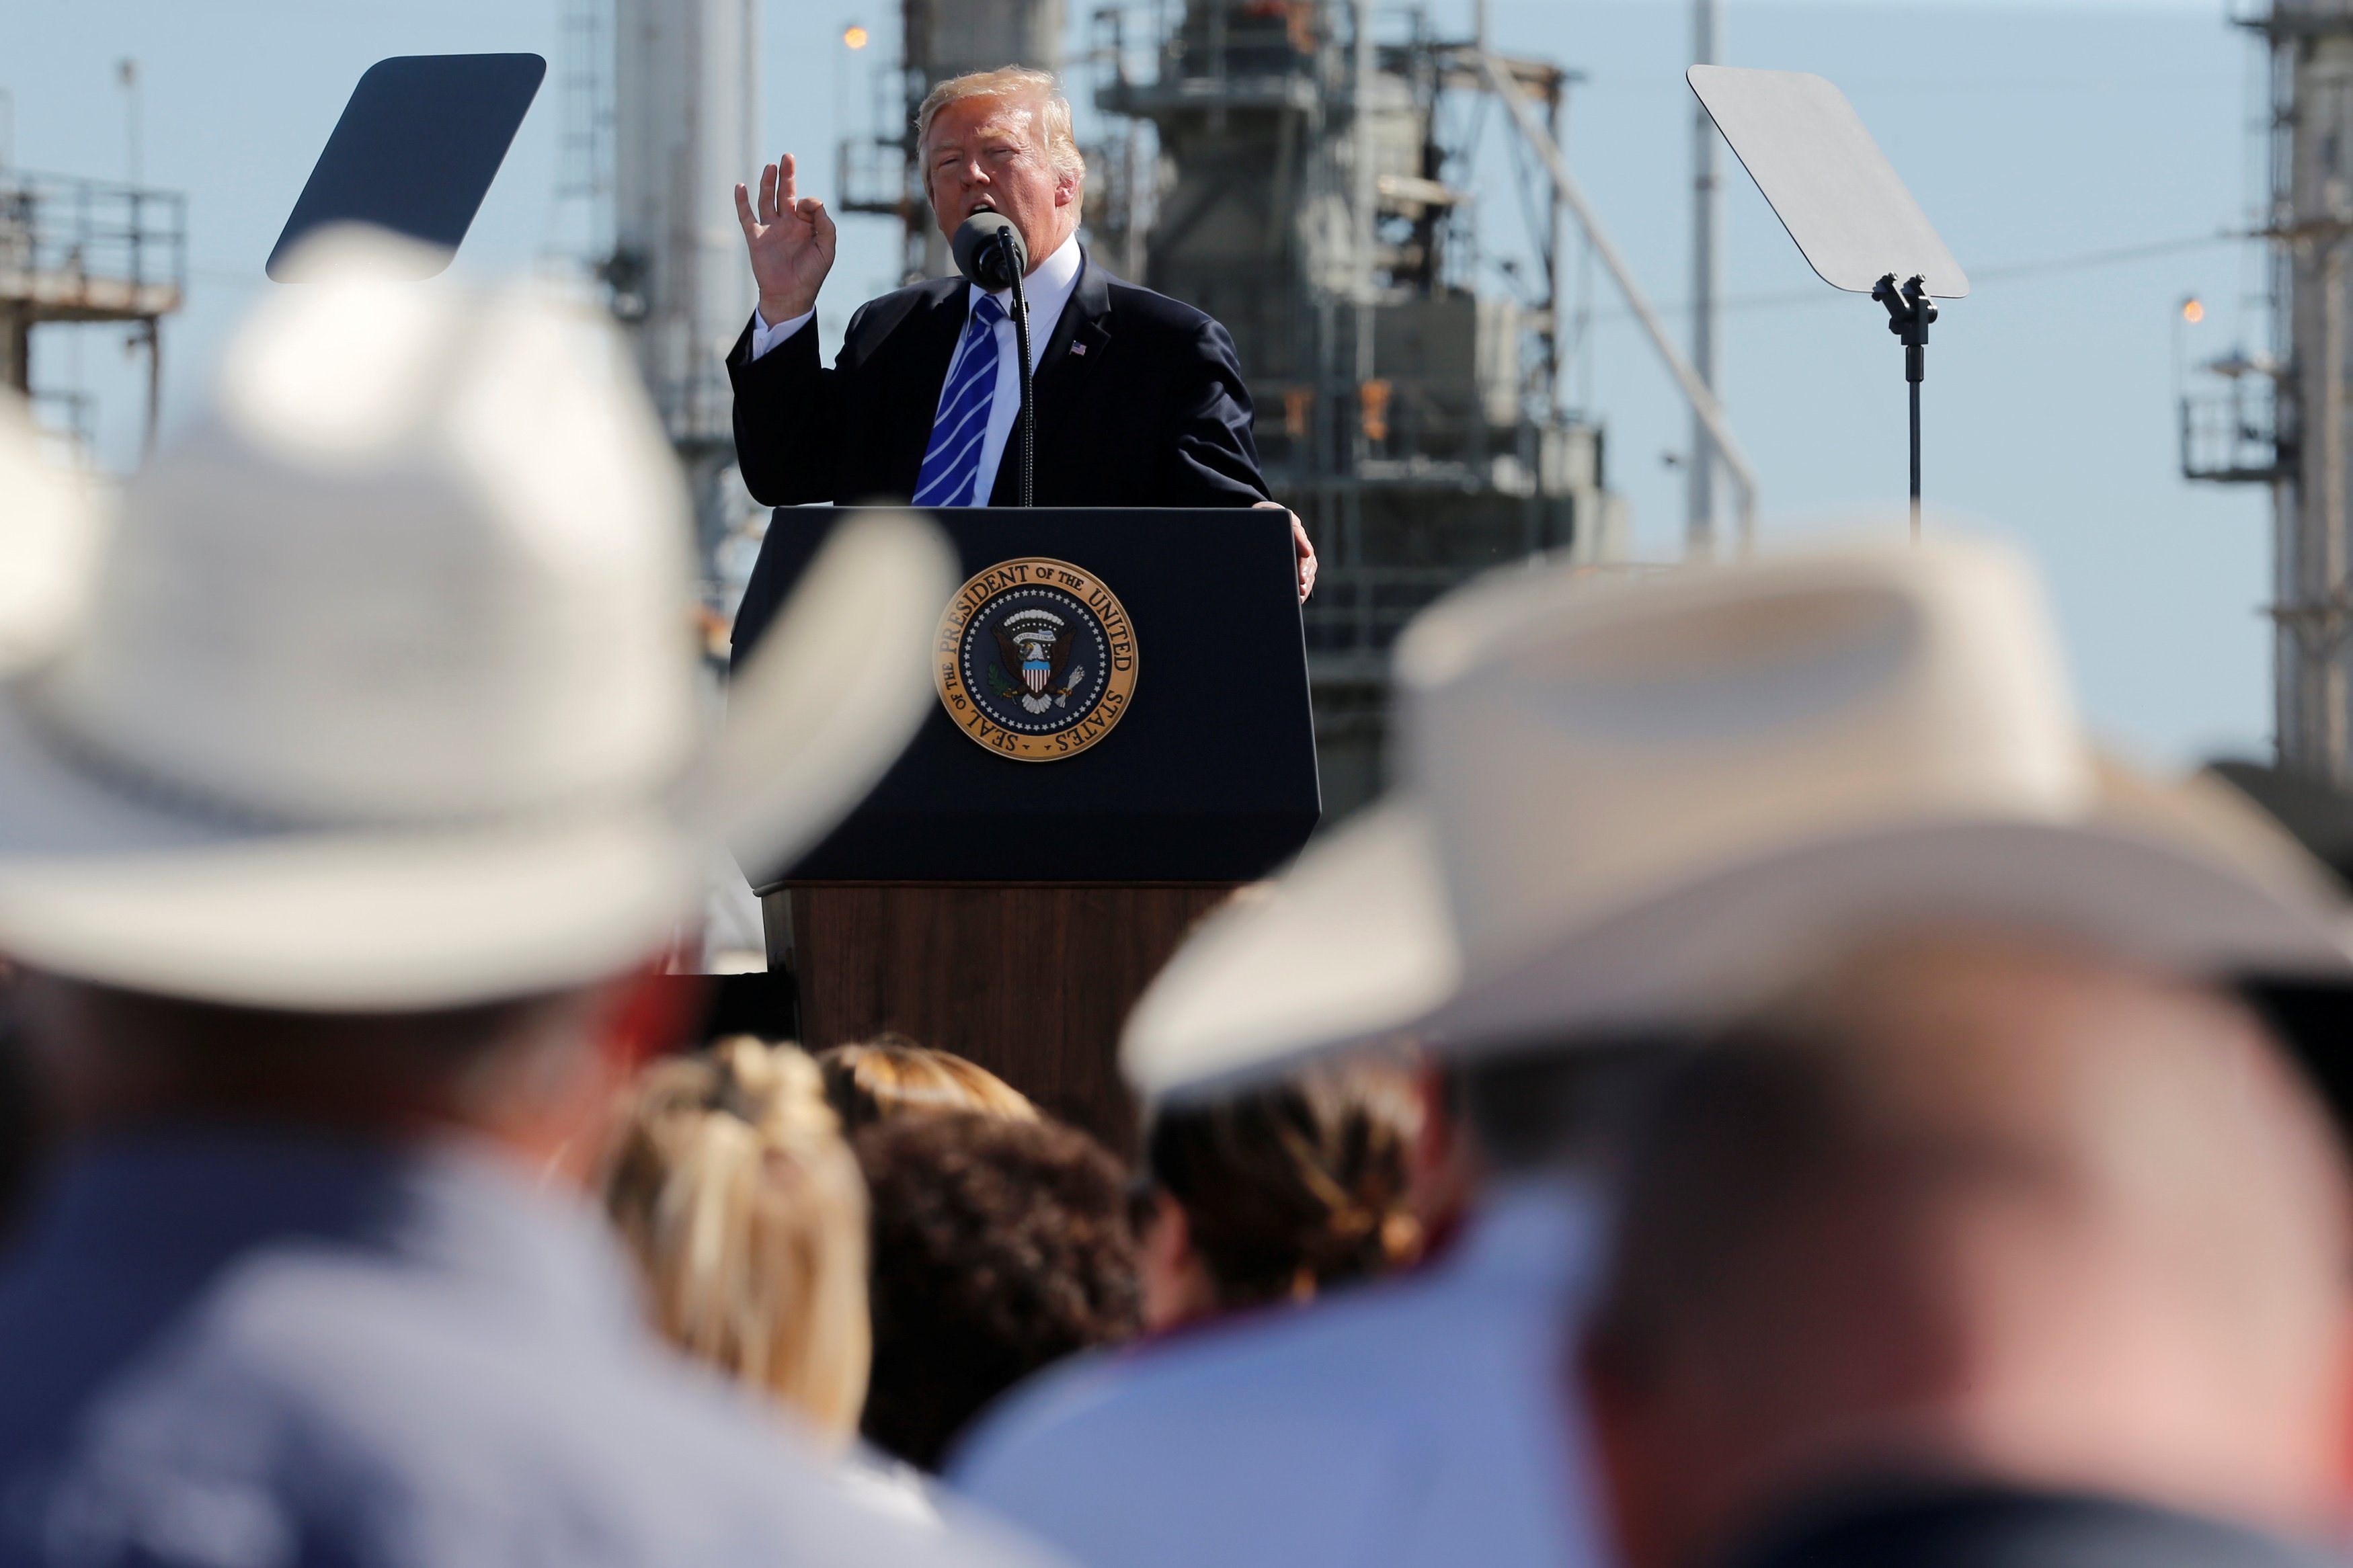 Trump delivers remarks on his proposed changes to the tax code during an event with energy workers at the Andeavor Refinery in Mandan, North Dakota